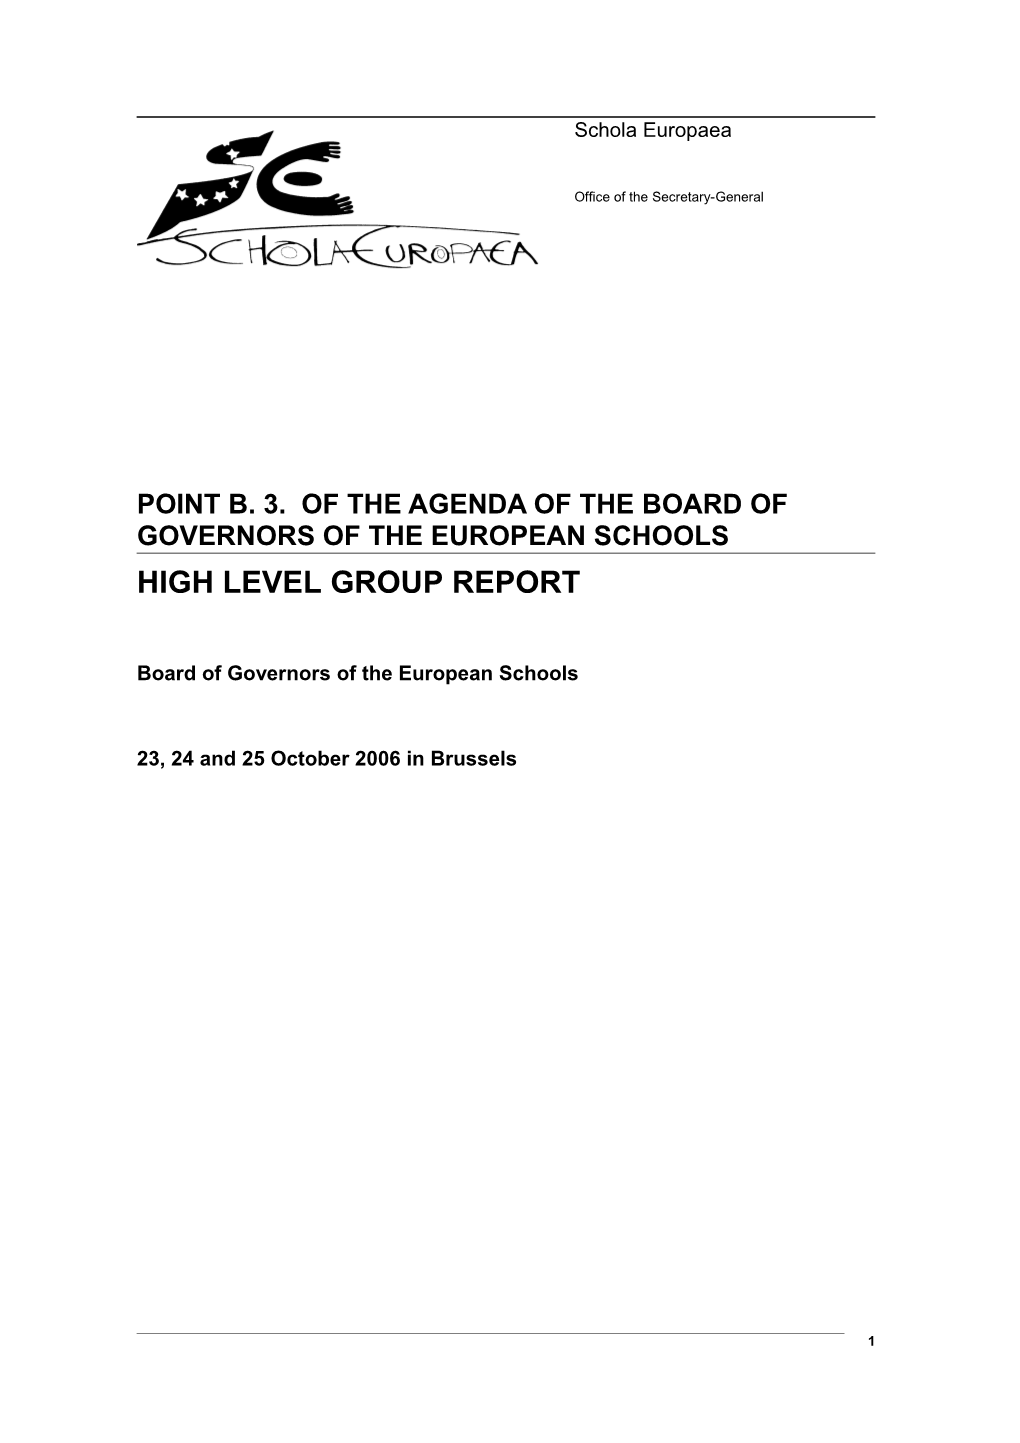 Point B. 3. of the Agenda of the Board of Governors of the European Schools